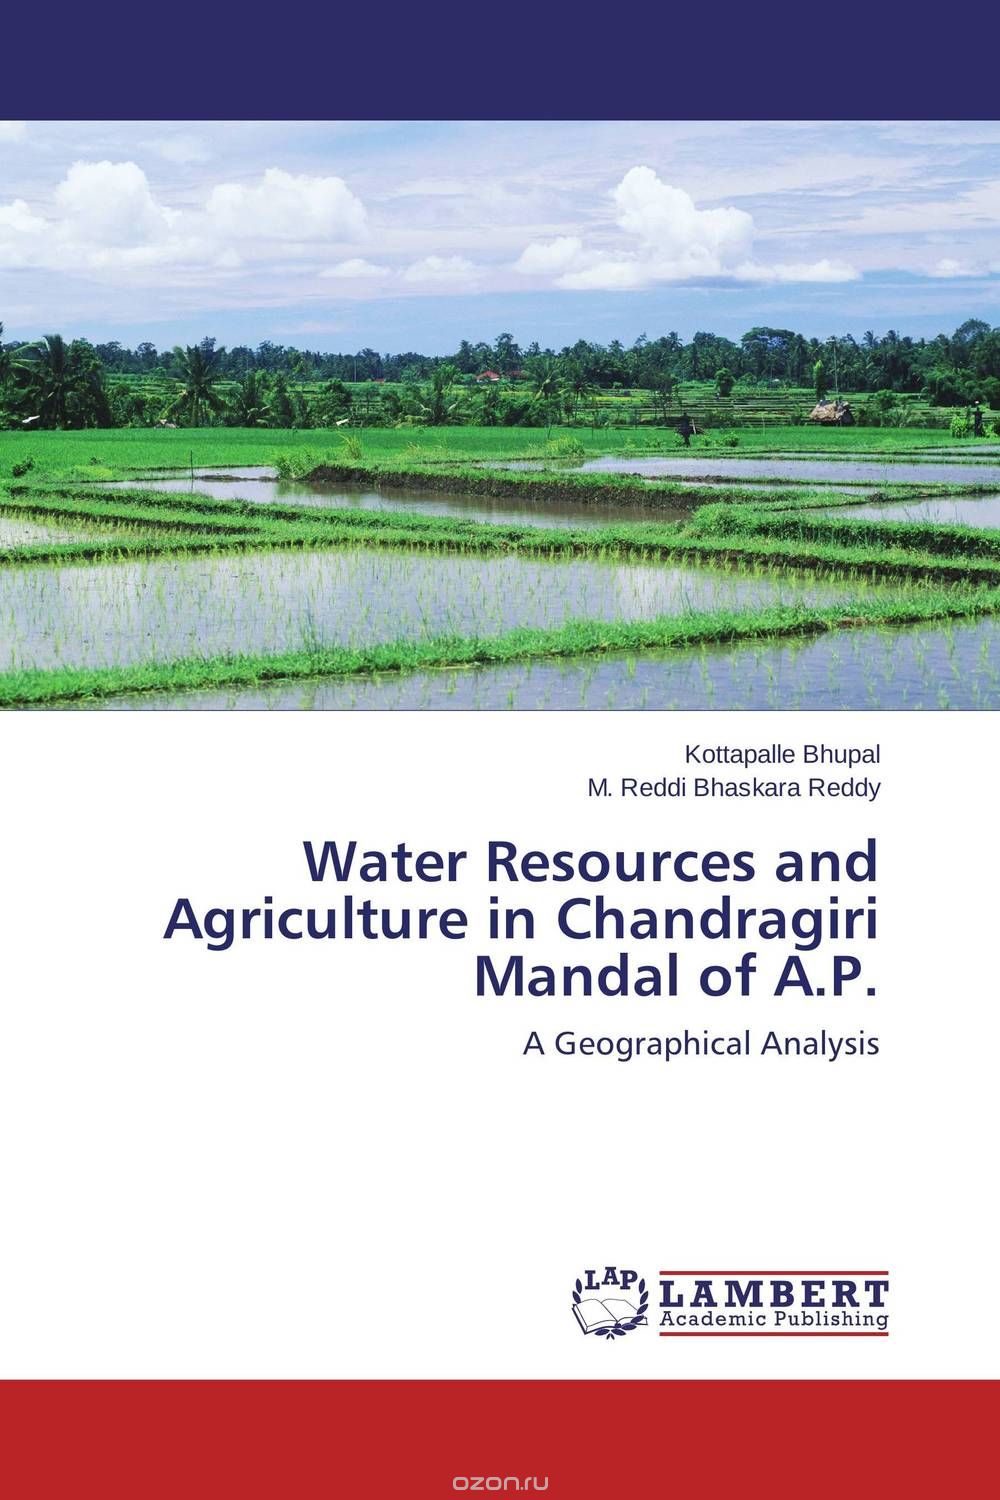 Скачать книгу "Water Resources and Agriculture in Chandragiri Mandal of  A.P."